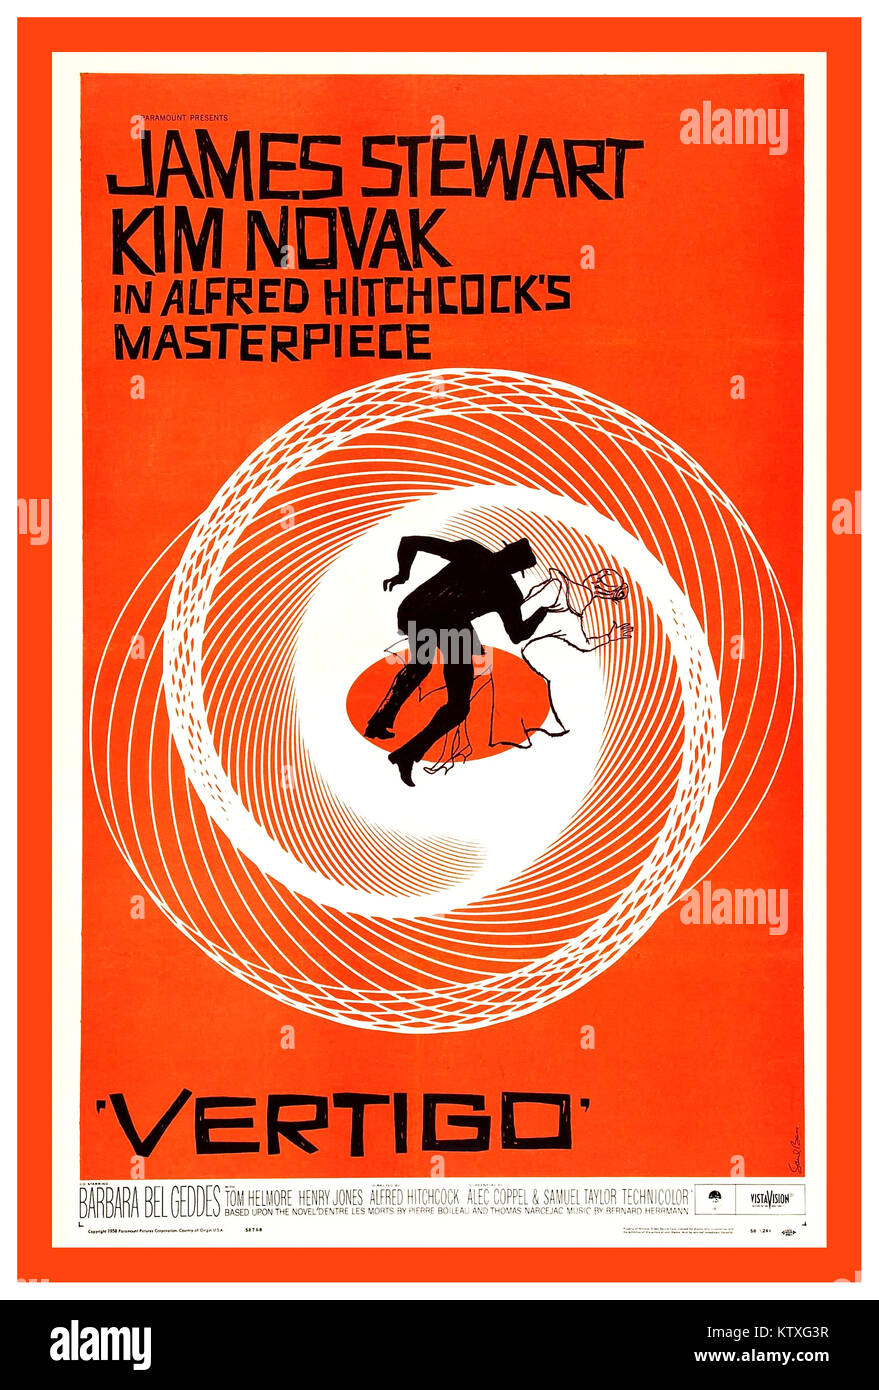 Retro vintage 1958 Film Poster Vertigo by Alfred Hitchcock A psychological thriller film produced by Alfred Hitchcock based on the novel D’entre les morts by Boileau-Narcejac in 1940. Starring James Stewart and Kim Novak Stock Photo